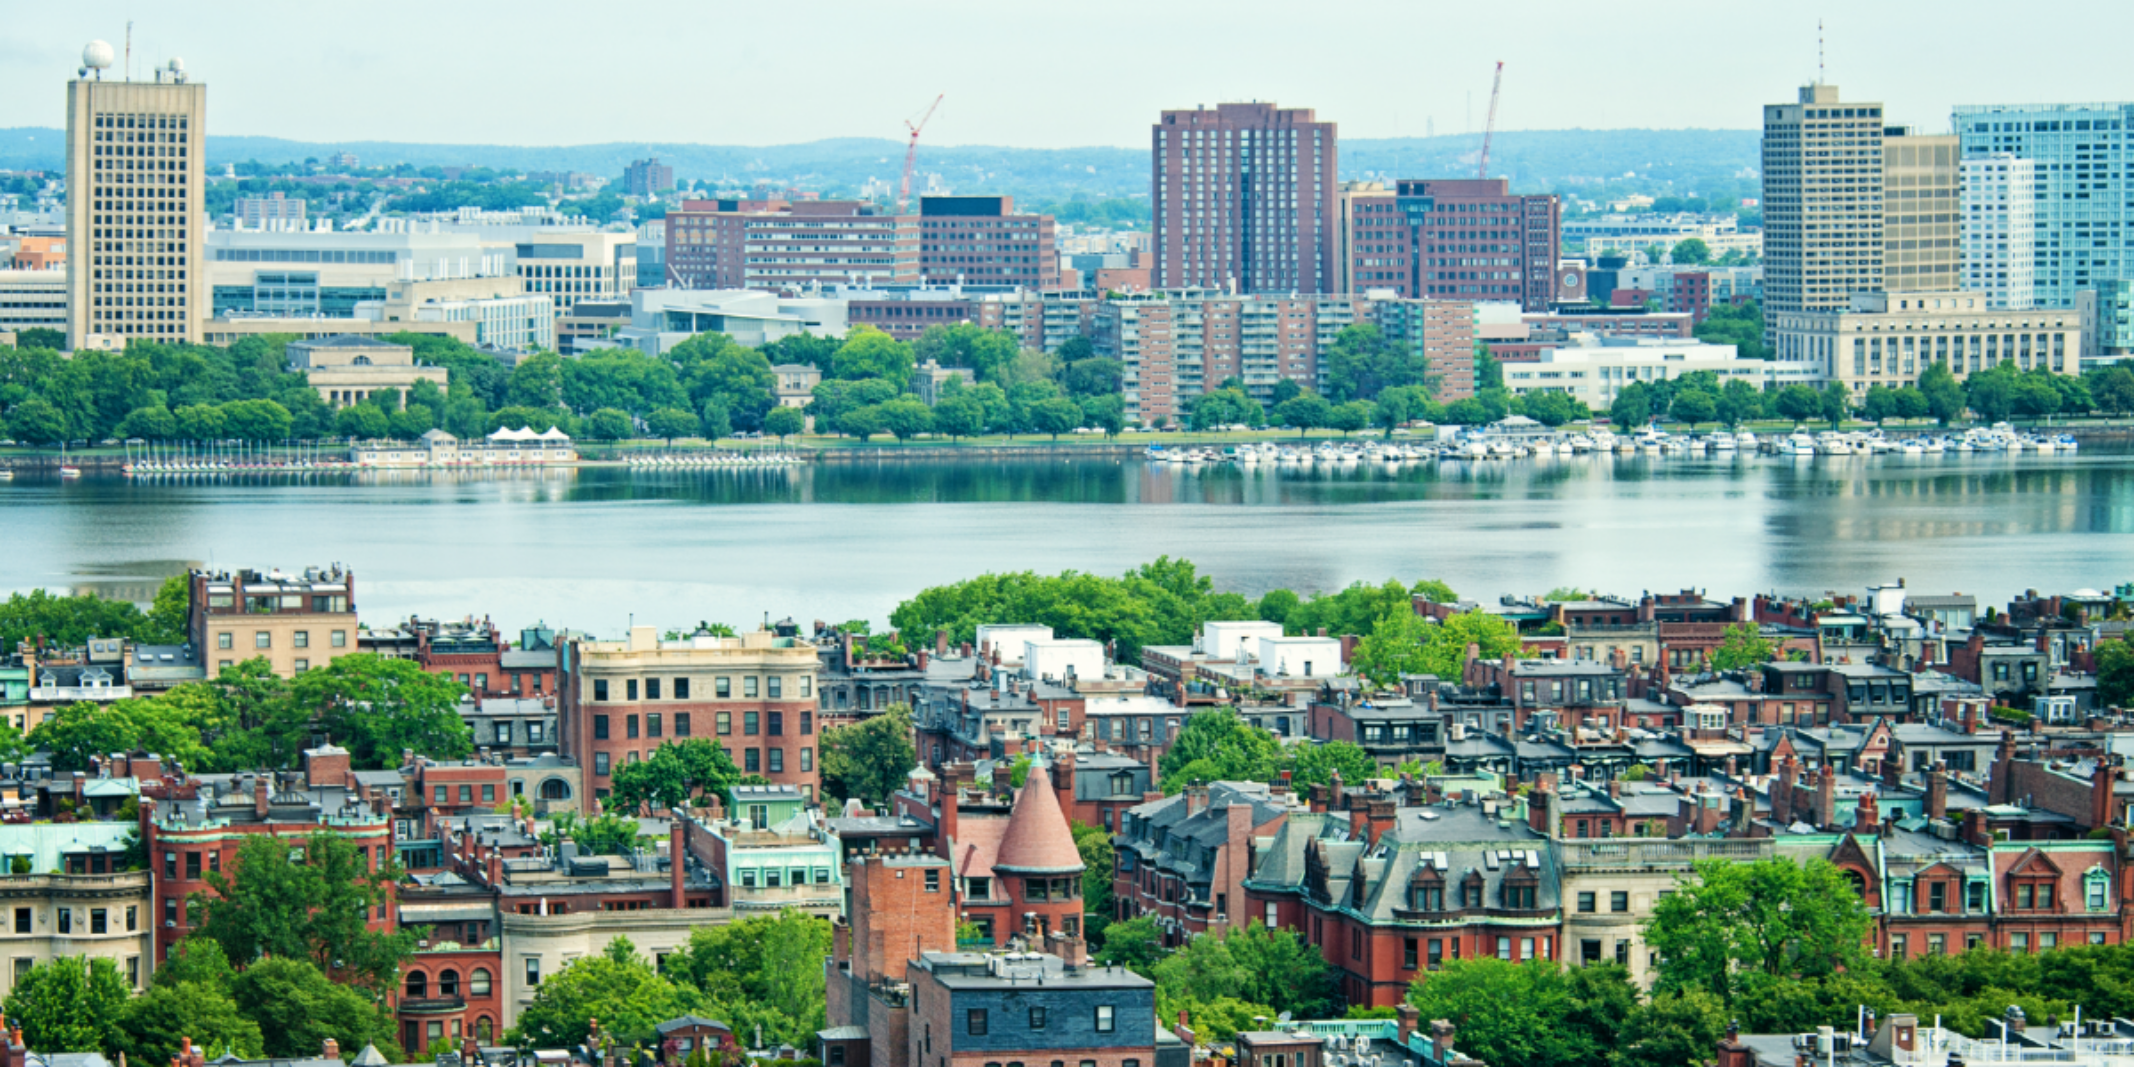 A view of the Charles River in Boston with houses in the foreground